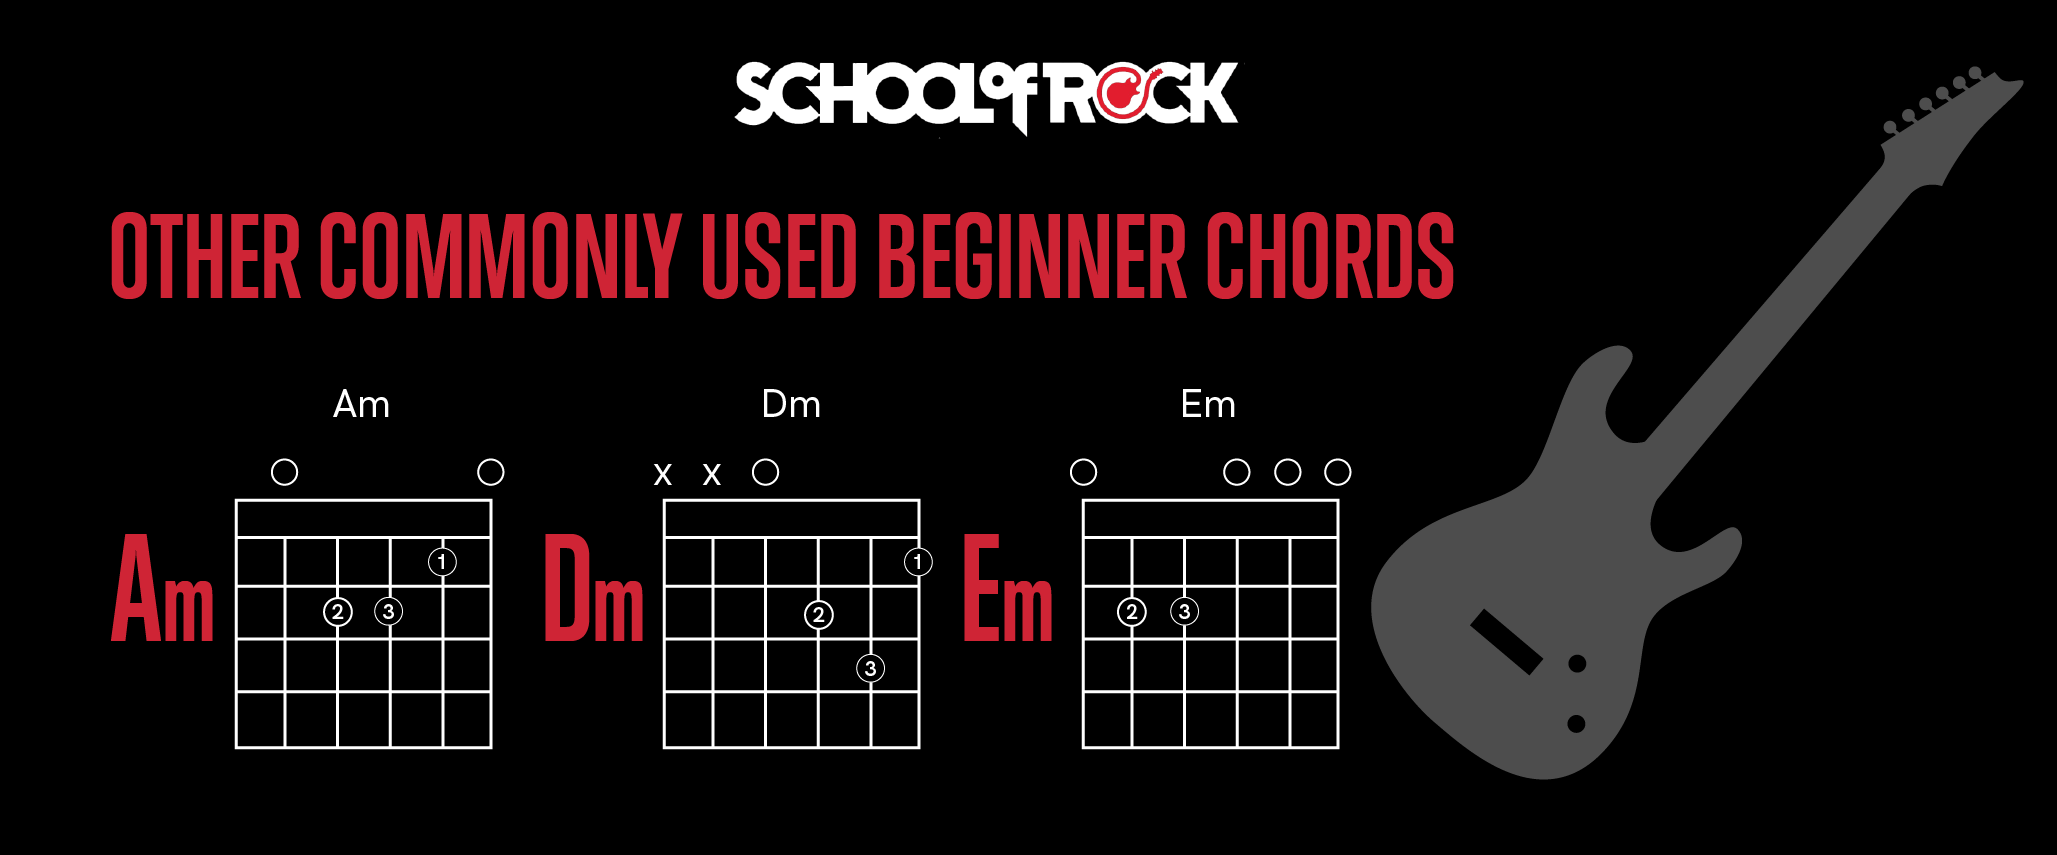 Other commonly used beginner guitar chords.